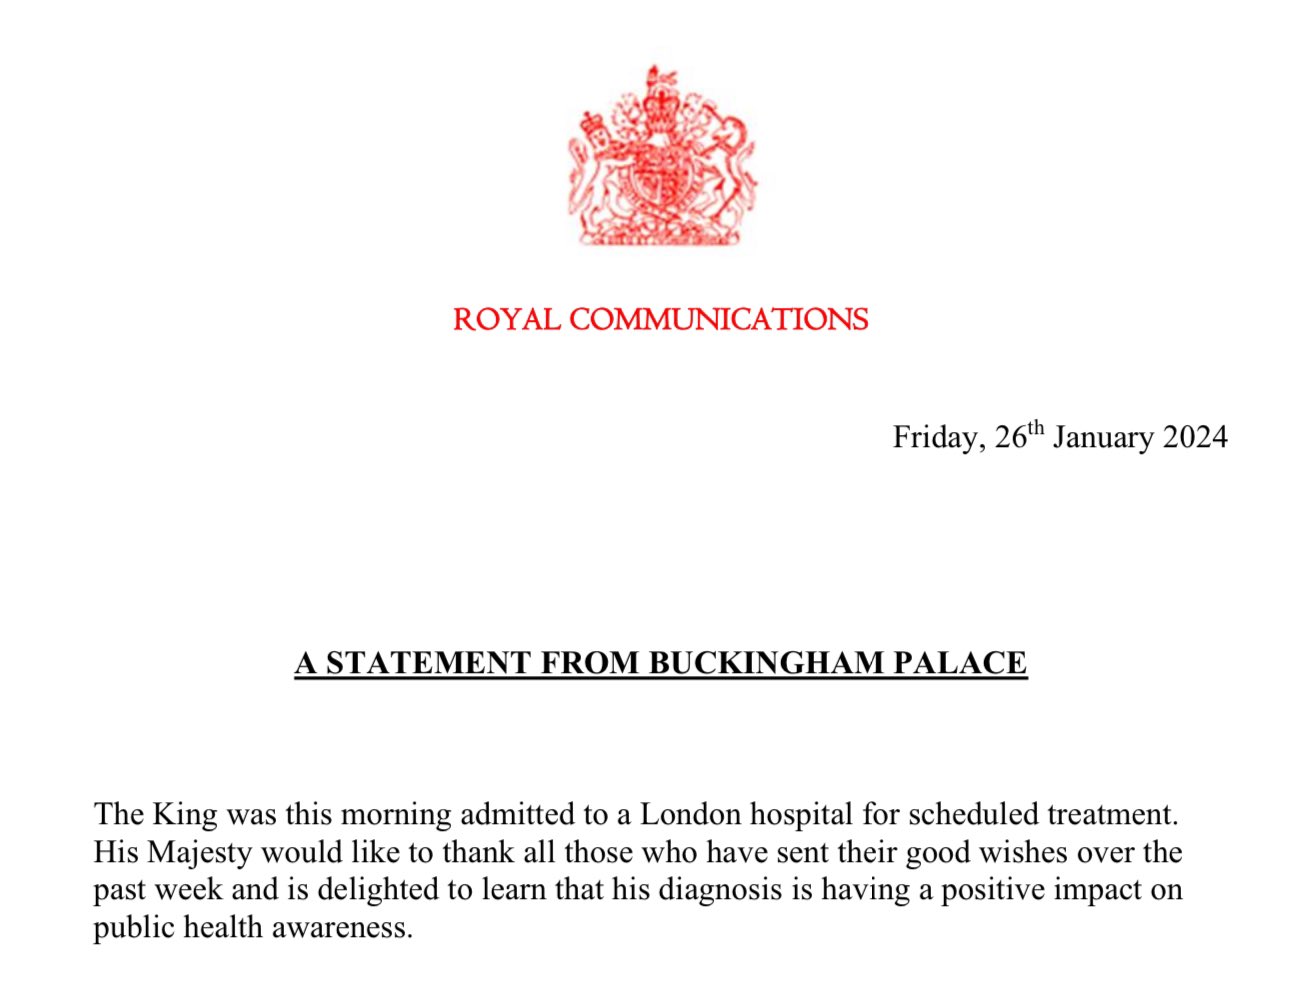 King Charles admitted to hospital for enlarged prostrate treatment